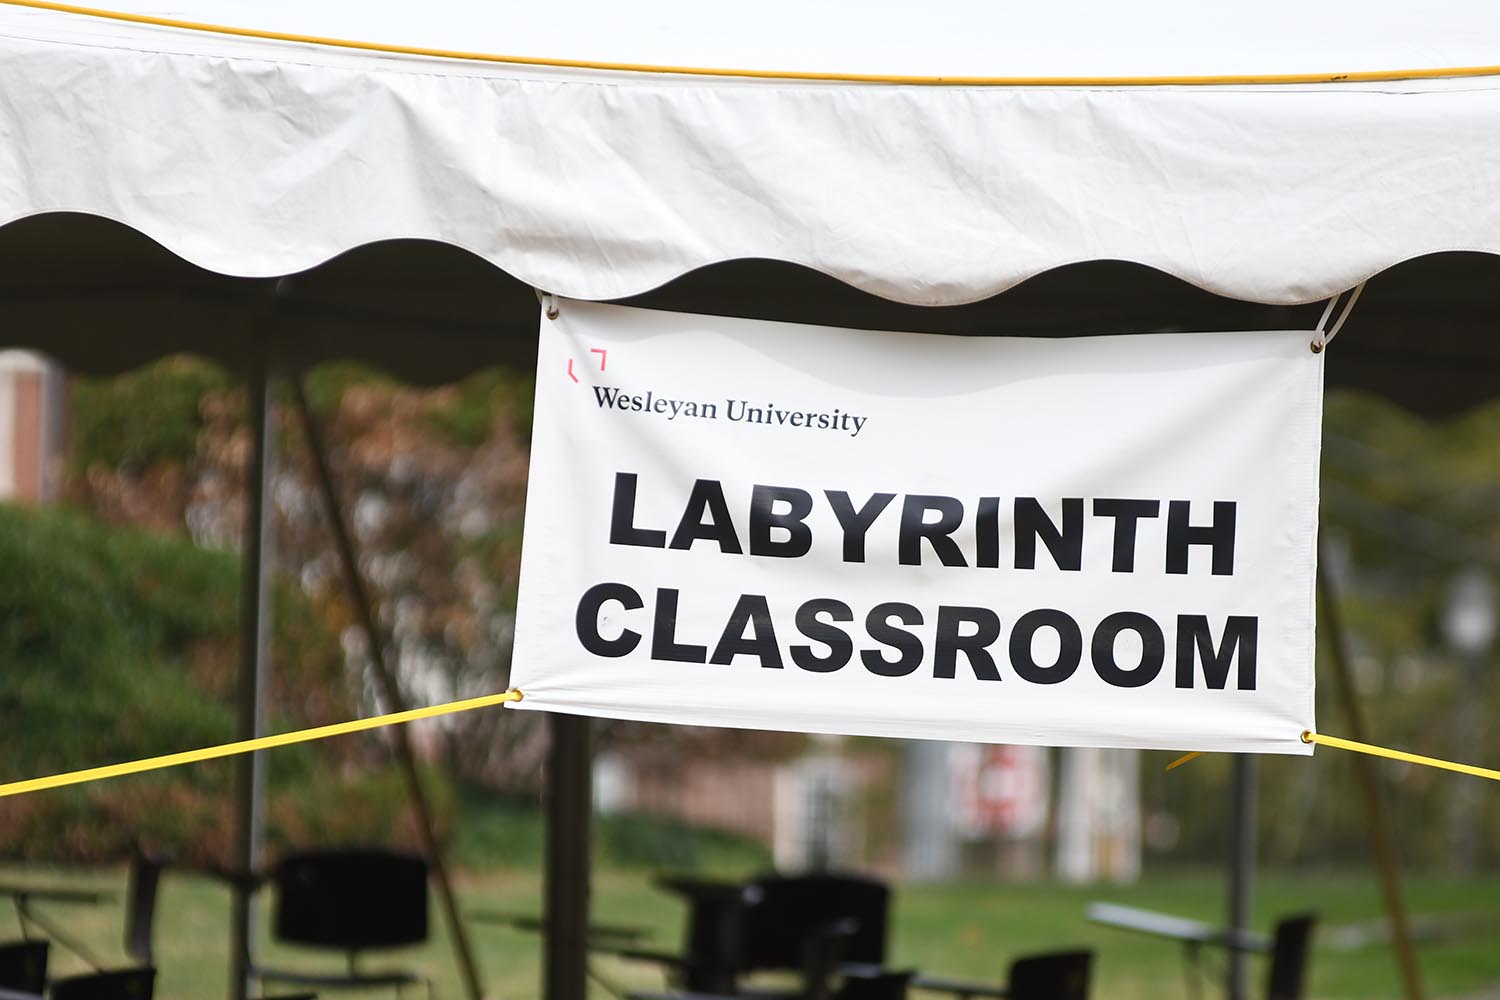 We have the Labyrinth classroom behind Skull & Serpent – these two are real 40 seat classrooms with portable AV. We store the equipment in an adjacent temp controlled trailer nightly. 